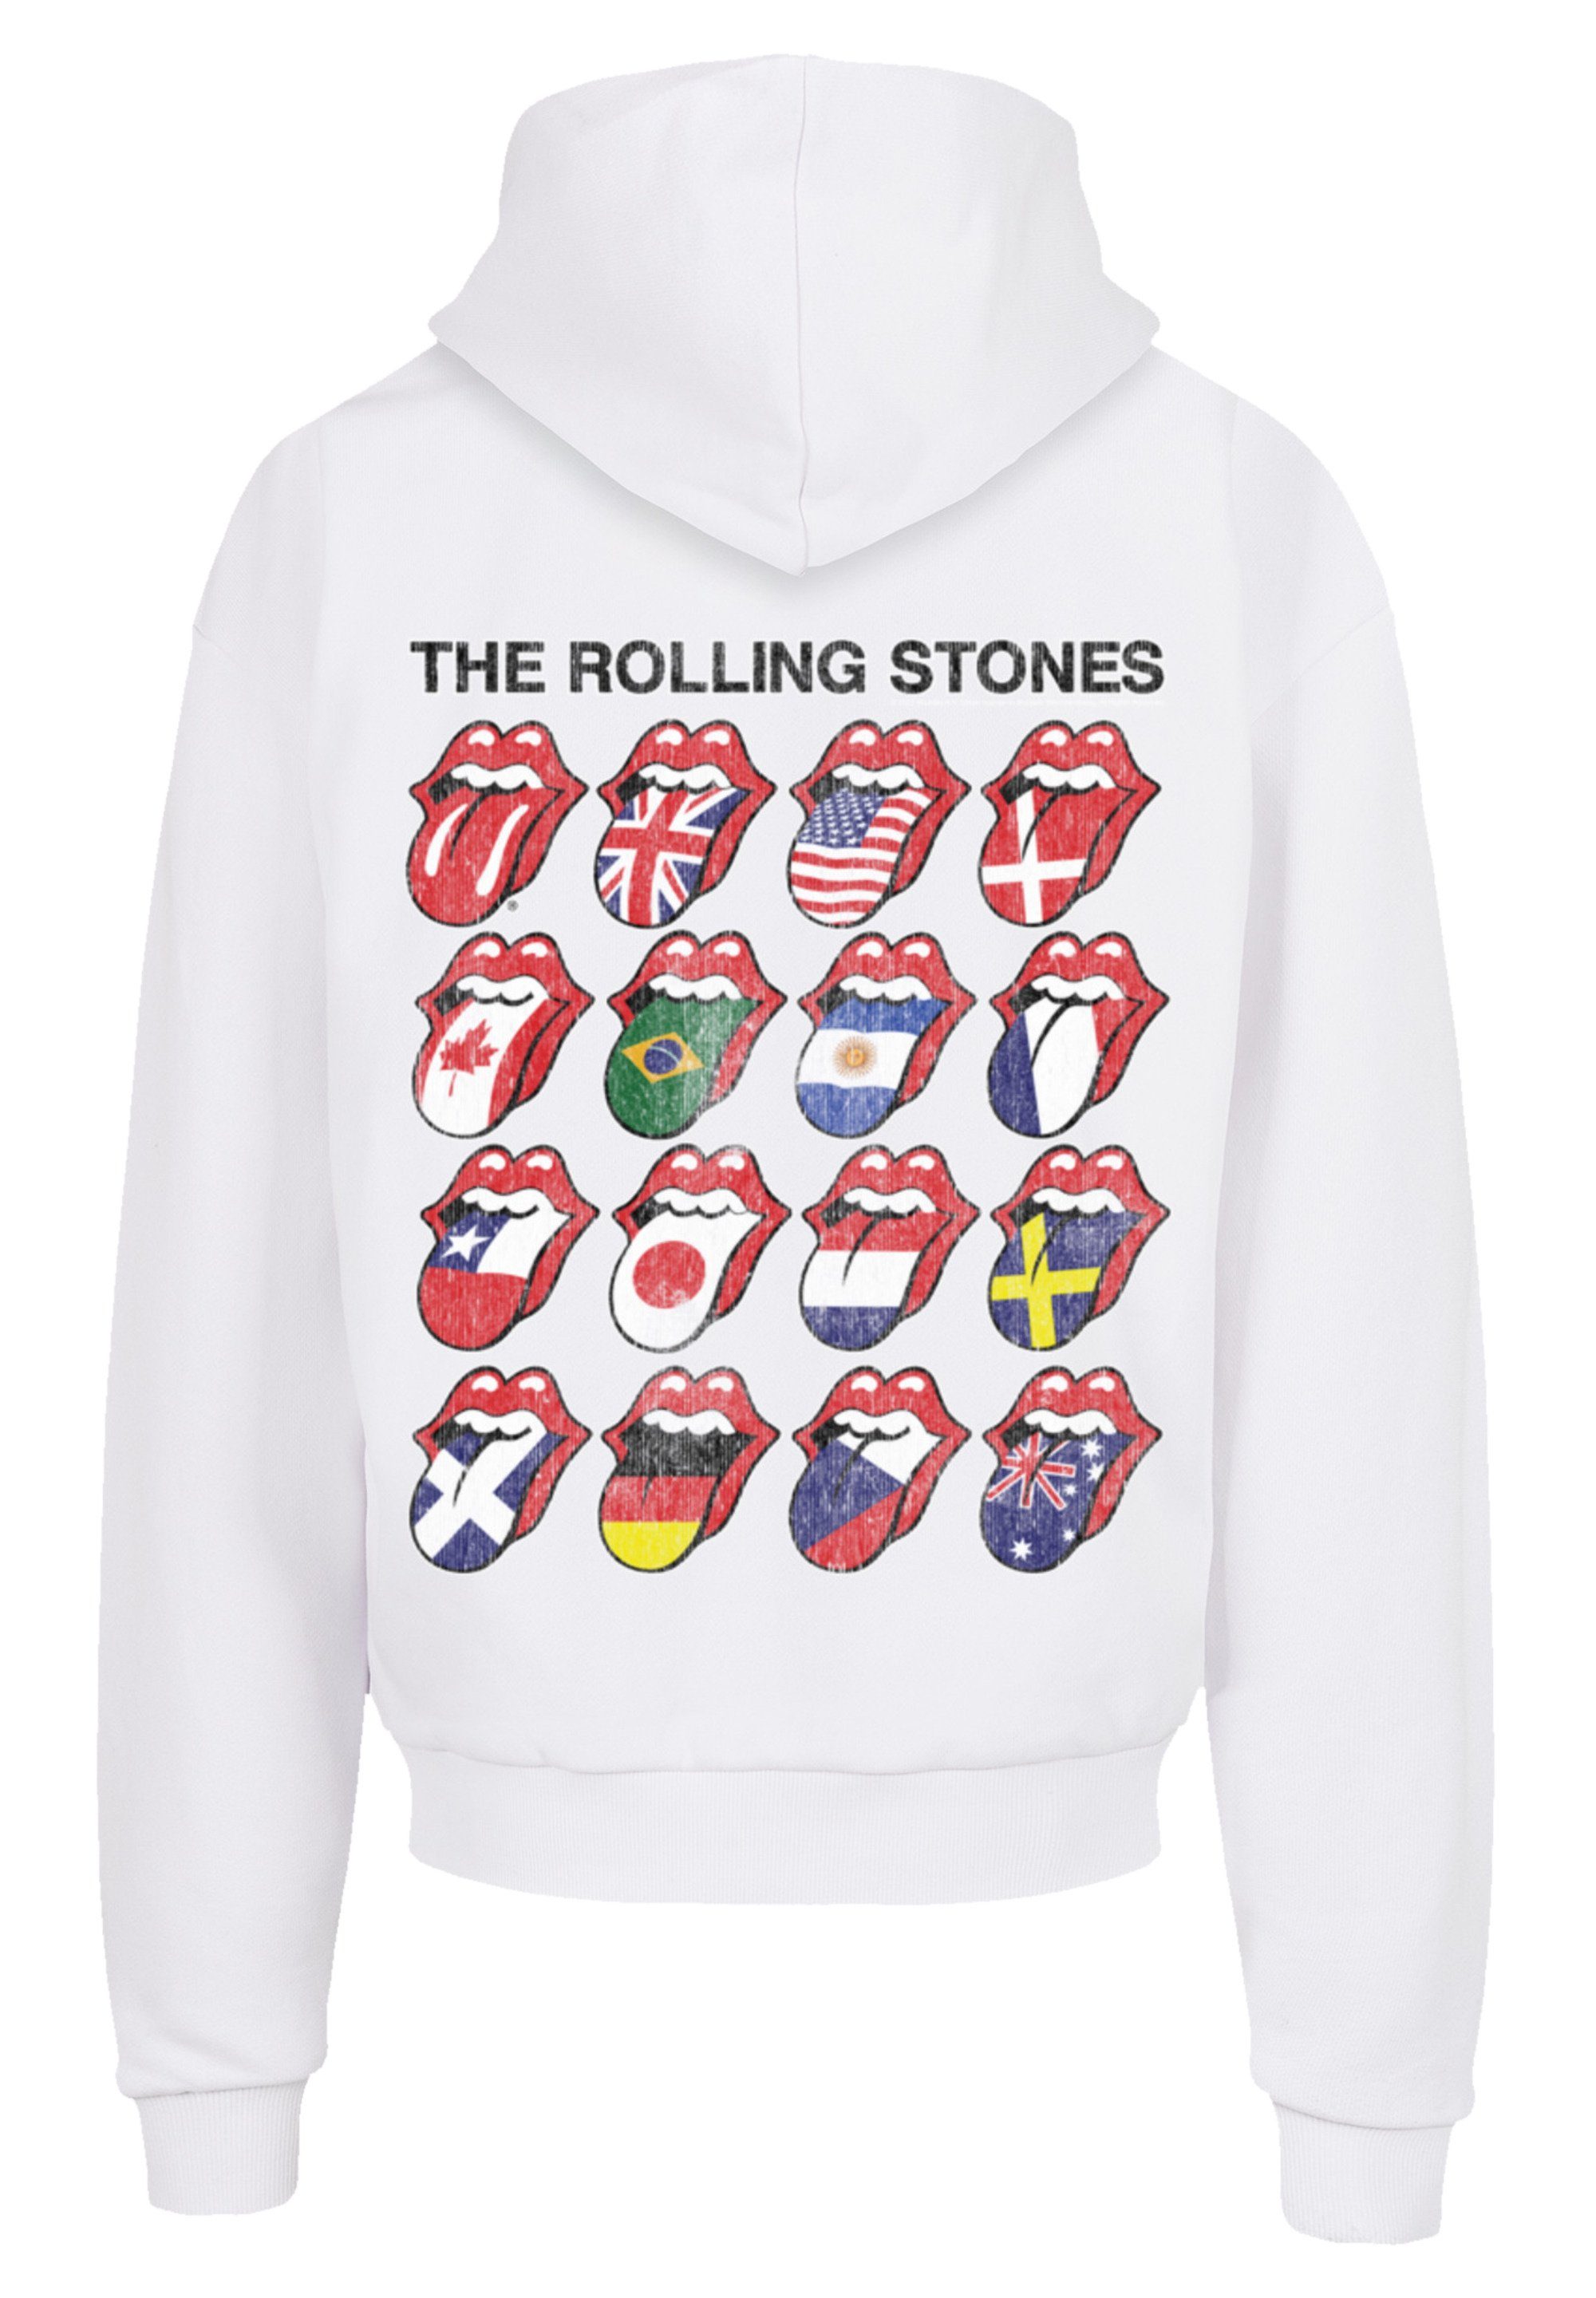 F4NT4STIC Kapuzenpullover The Rolling Musik, Offiziell Stones Rolling Stones Voodoo Lounge The Tongues lizenzierter Hoodie Band, Logo